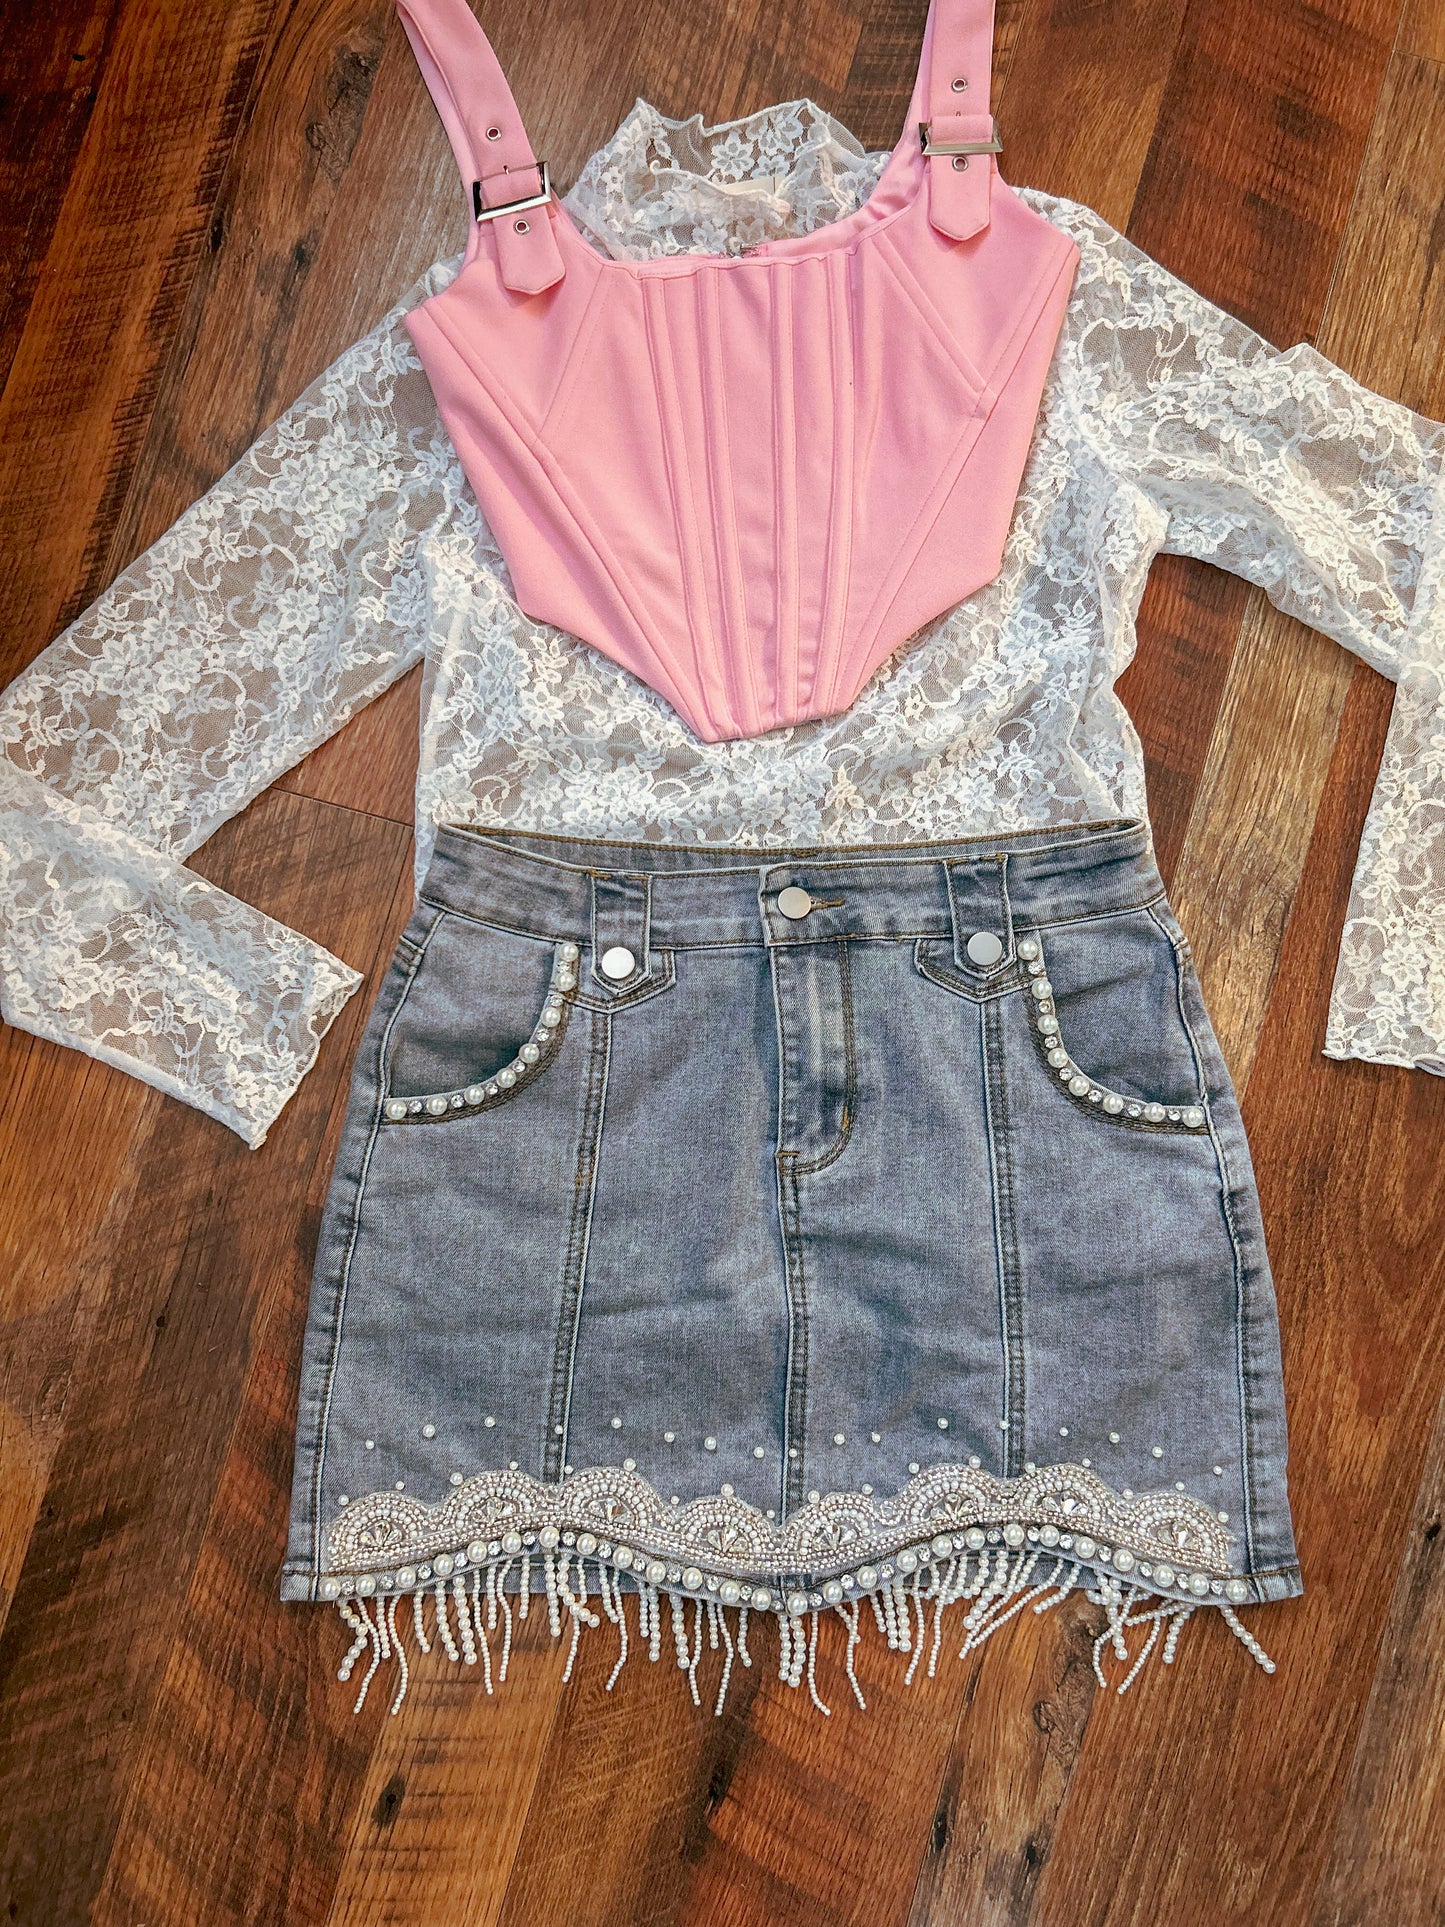 Delicate White Lace Mesh Layering Top